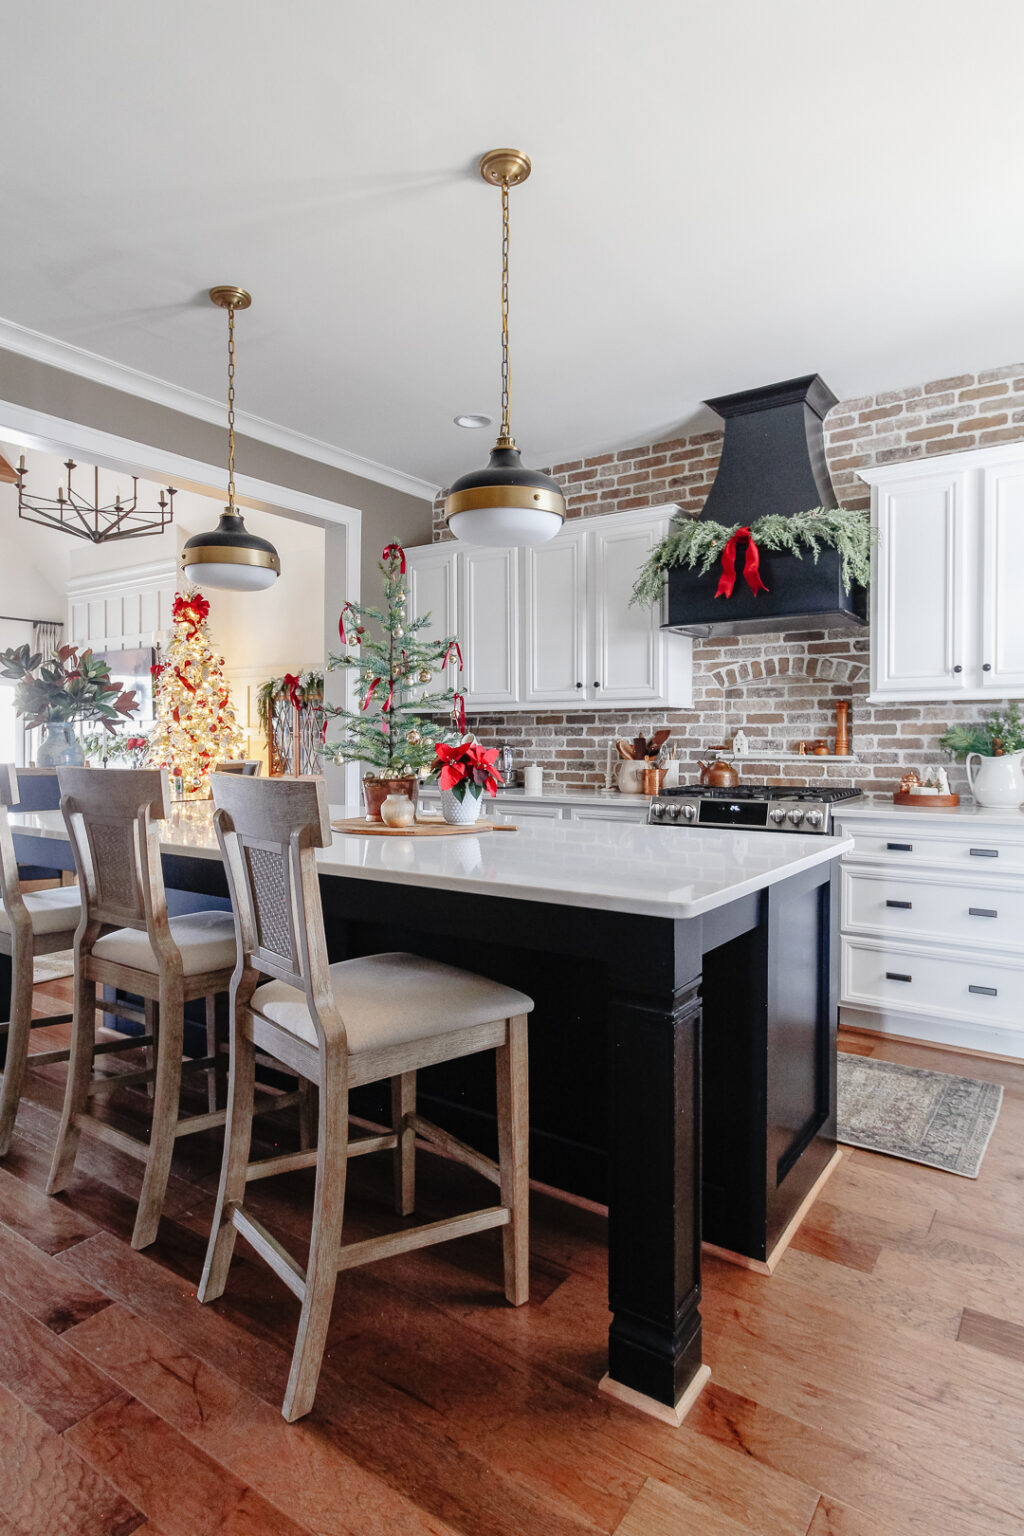 Simple Touches of Christmas in the Kitchen - Deeply Southern Home